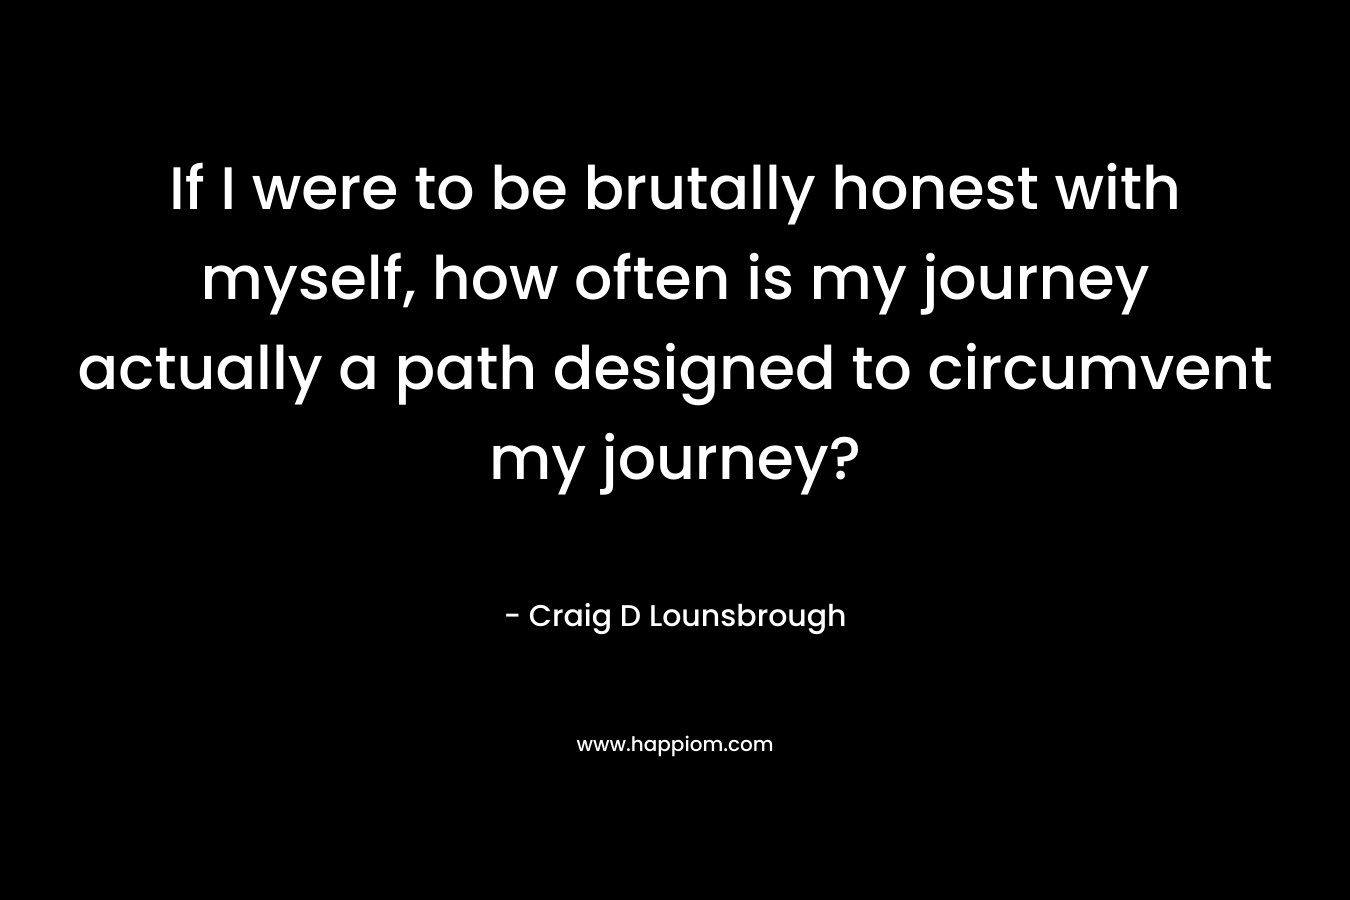 If I were to be brutally honest with myself, how often is my journey actually a path designed to circumvent my journey? – Craig D Lounsbrough